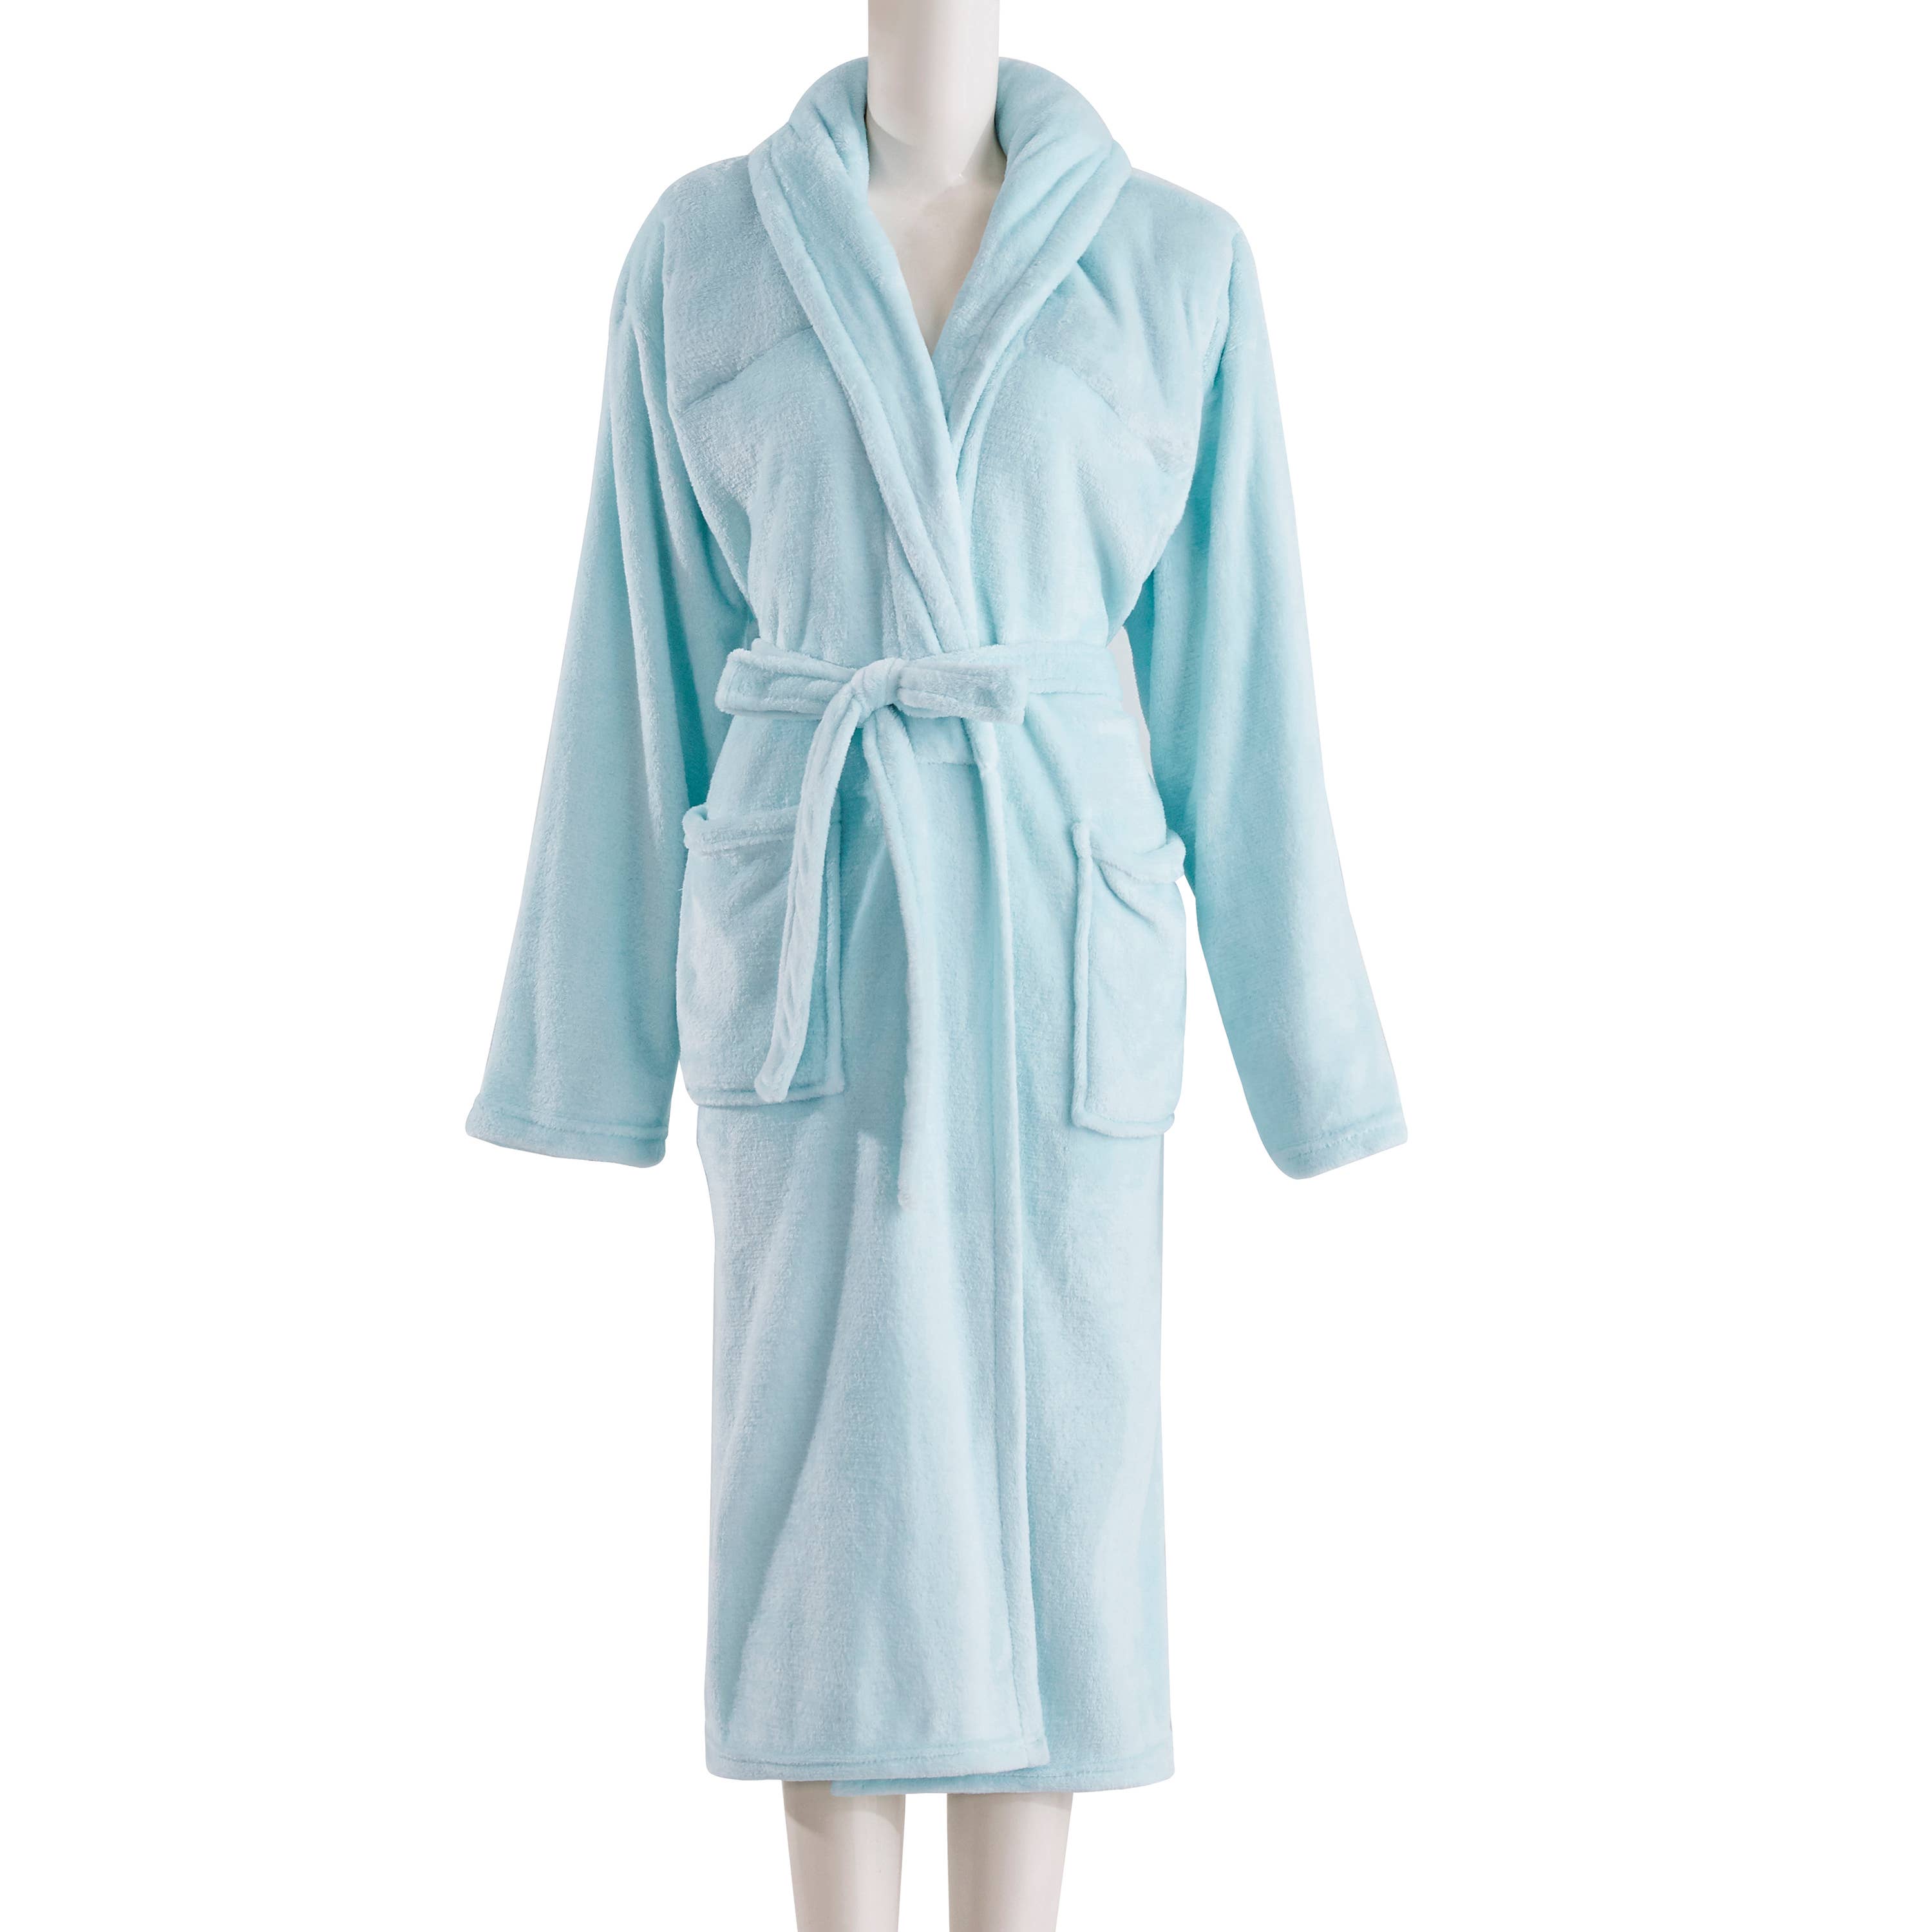 A light blue robe is modeled on a mannequin.